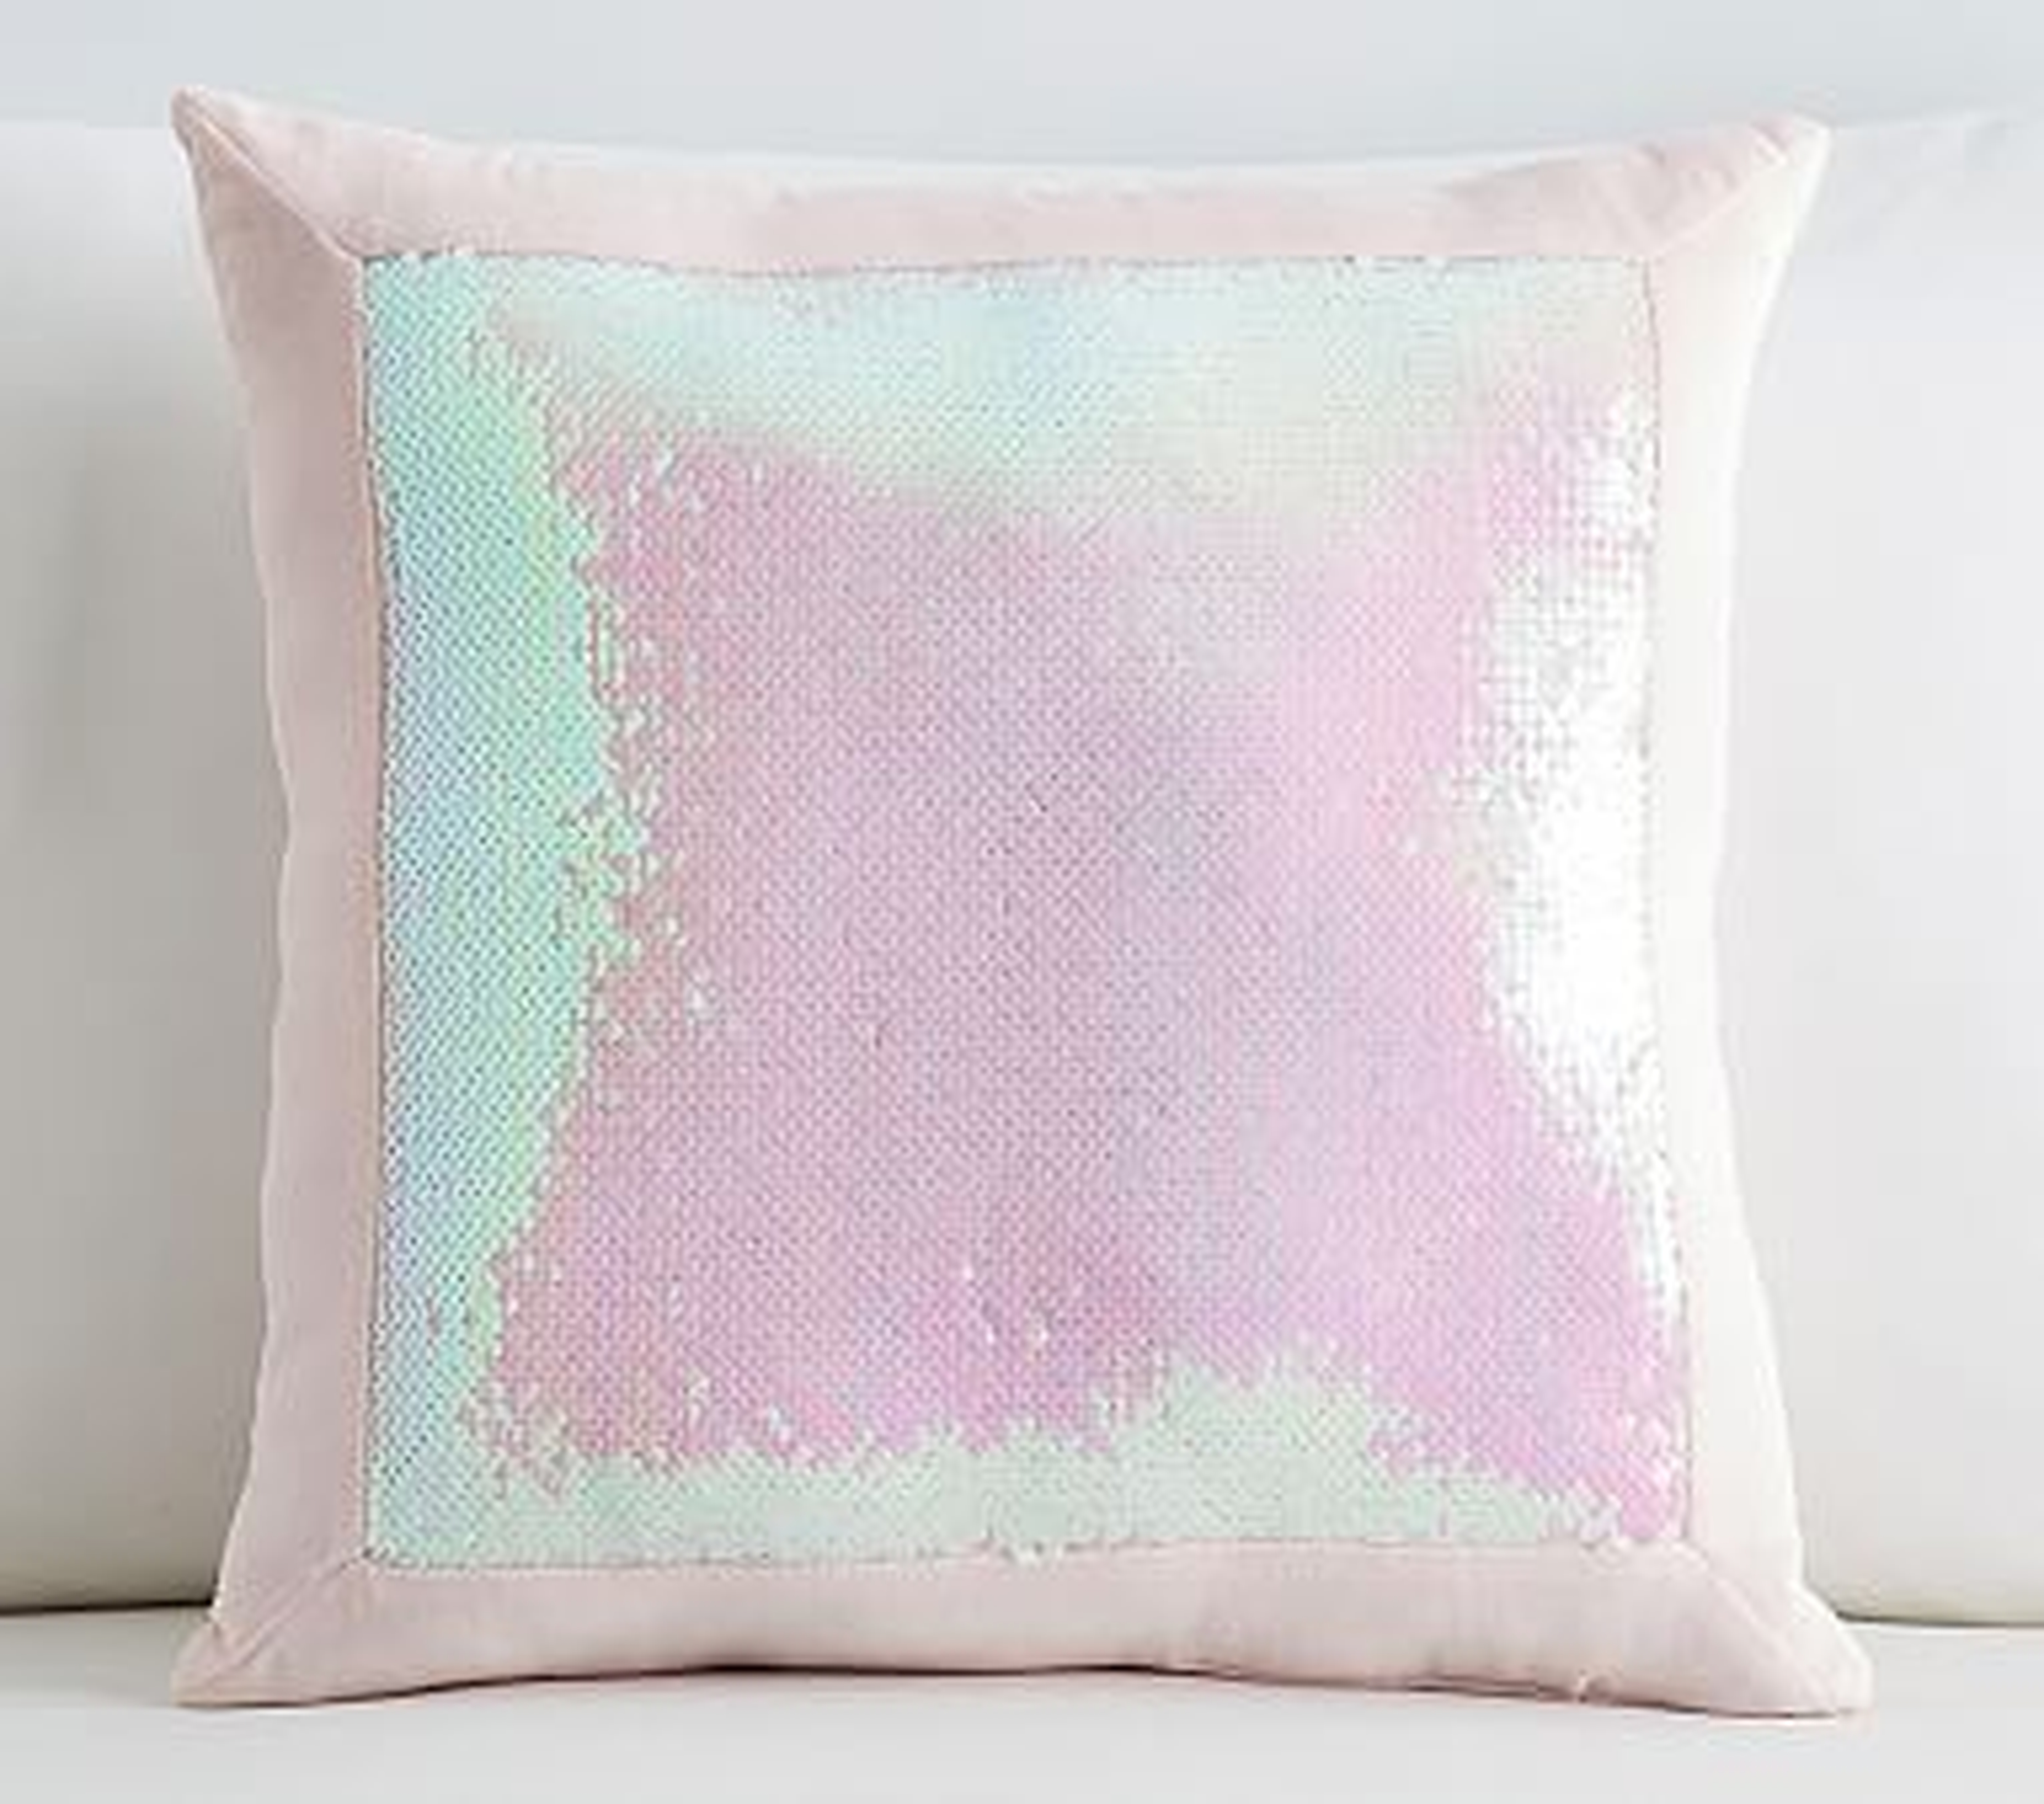 Sequin Framed Pillow, 16x16 Inches, Pink - Pottery Barn Kids